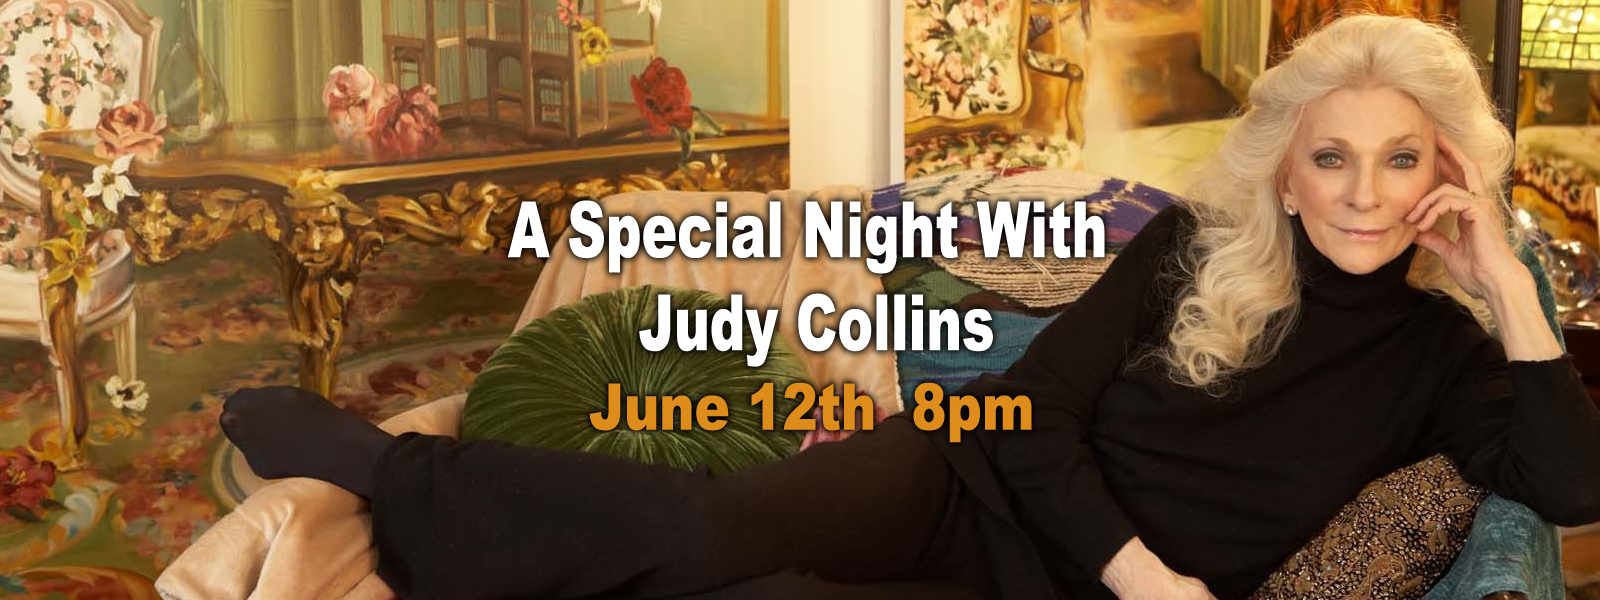 A Special Night With Judy Collins